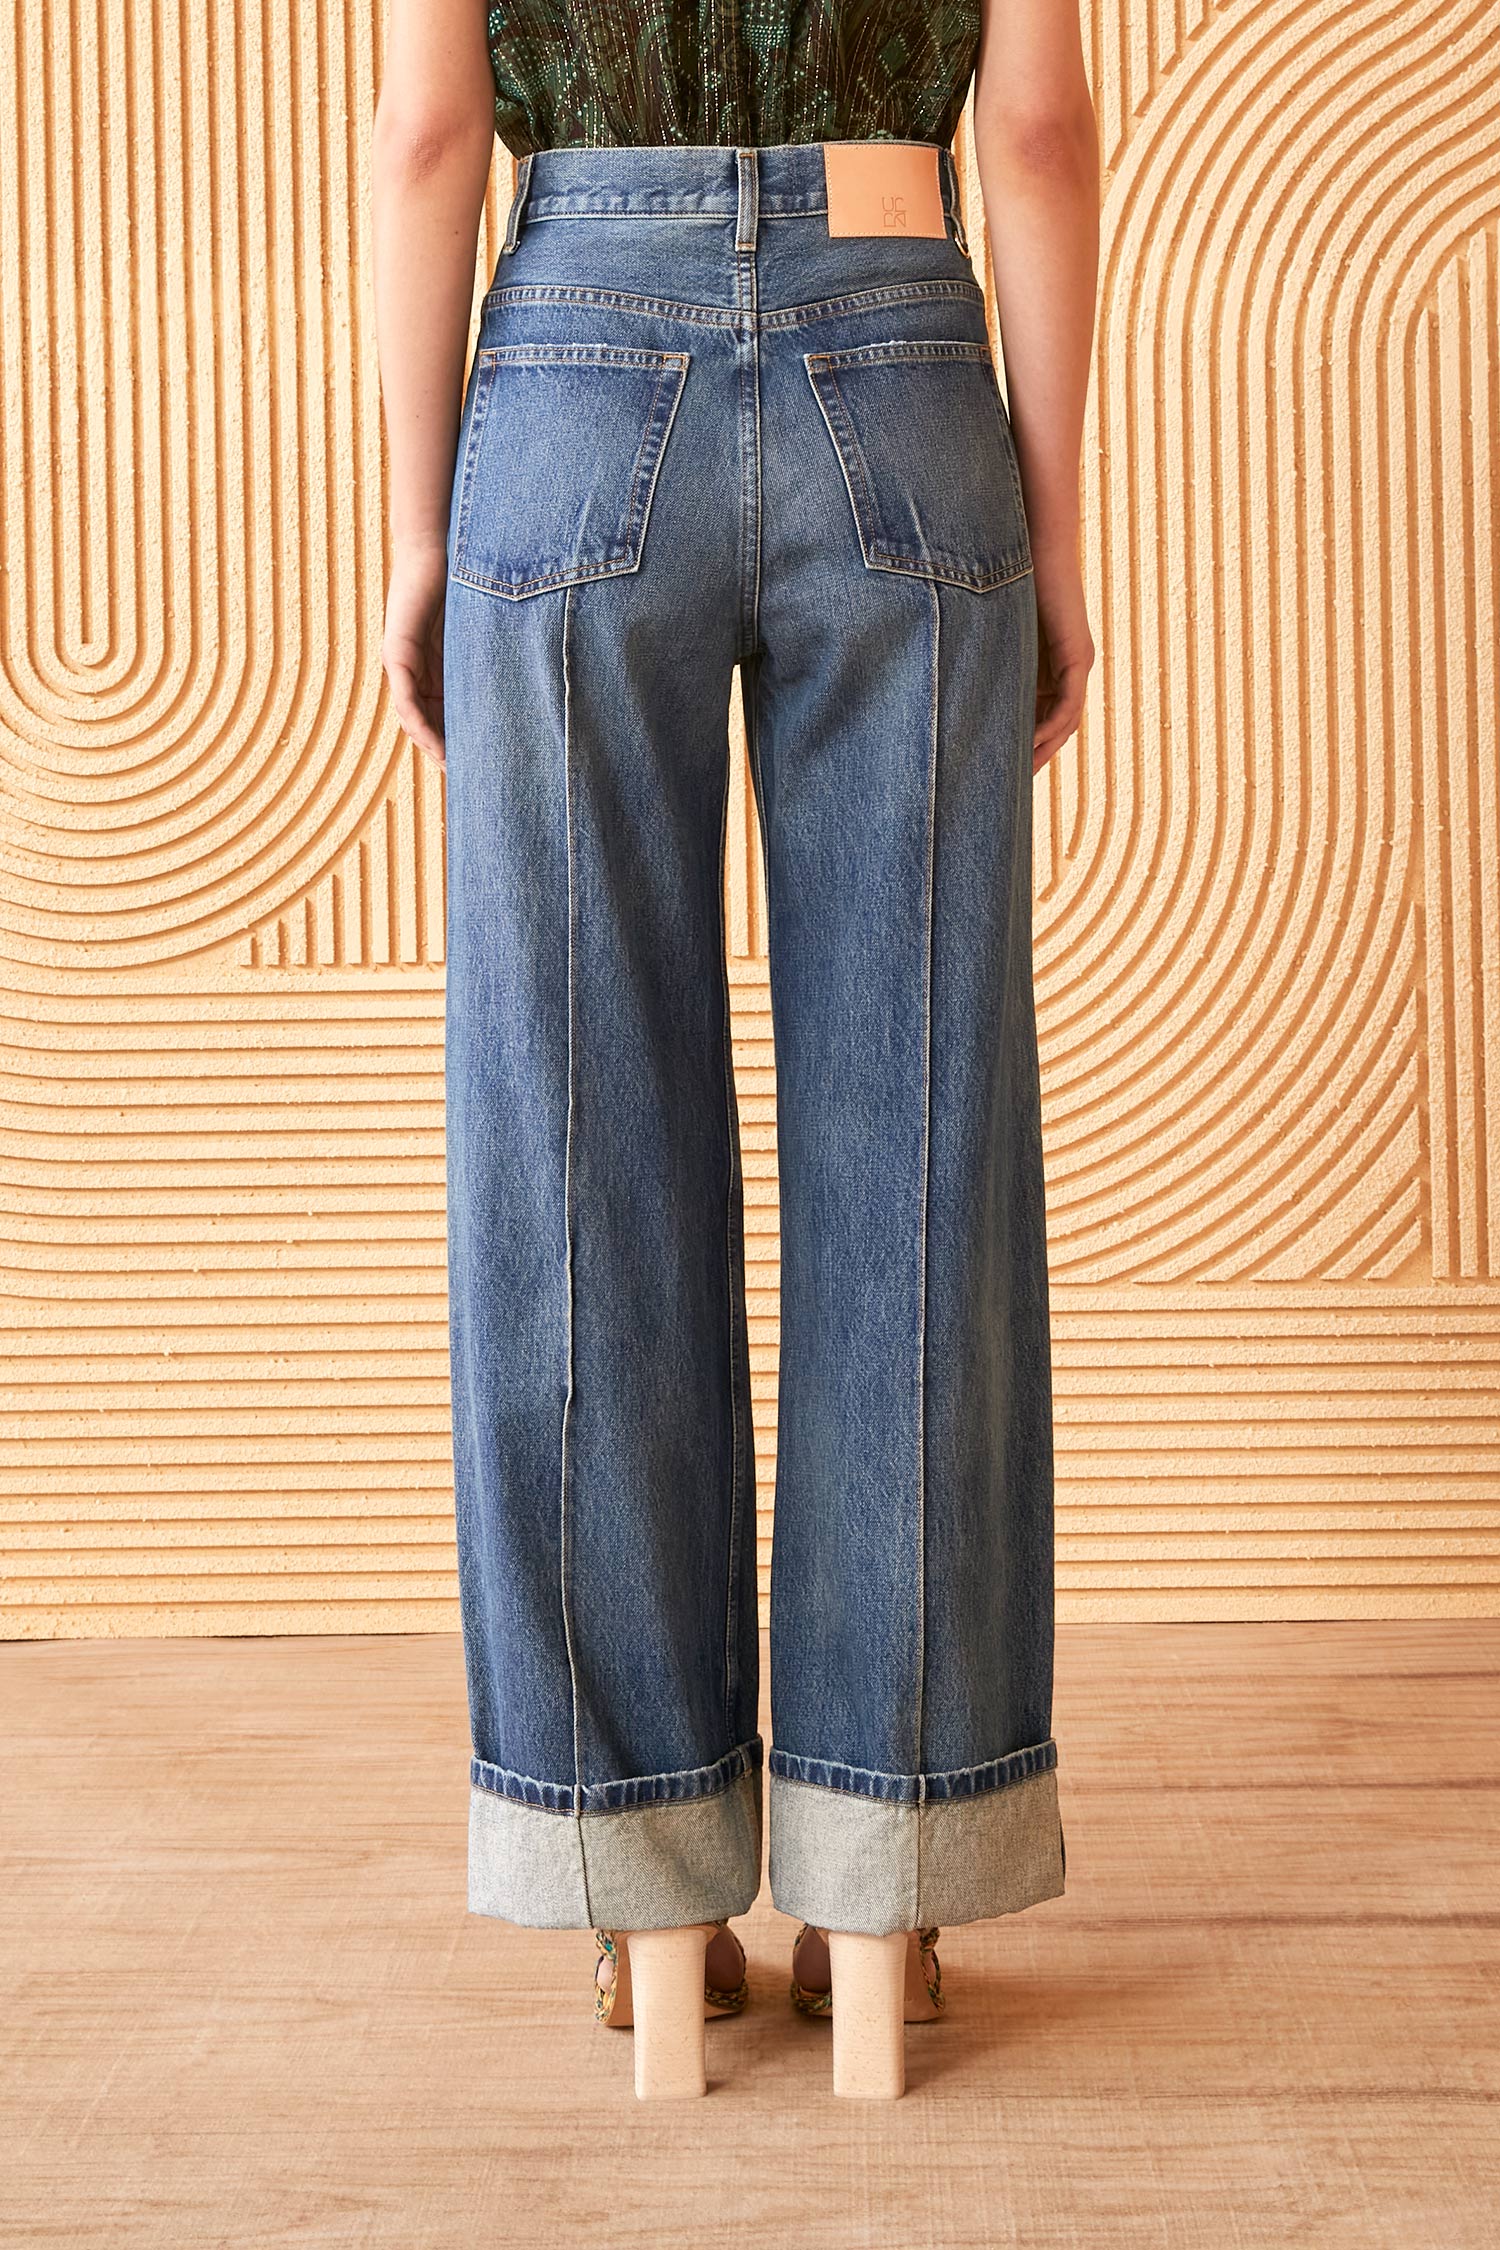 DENIM PATCH JEANS (FWP100 - The Shoppes at Occasions